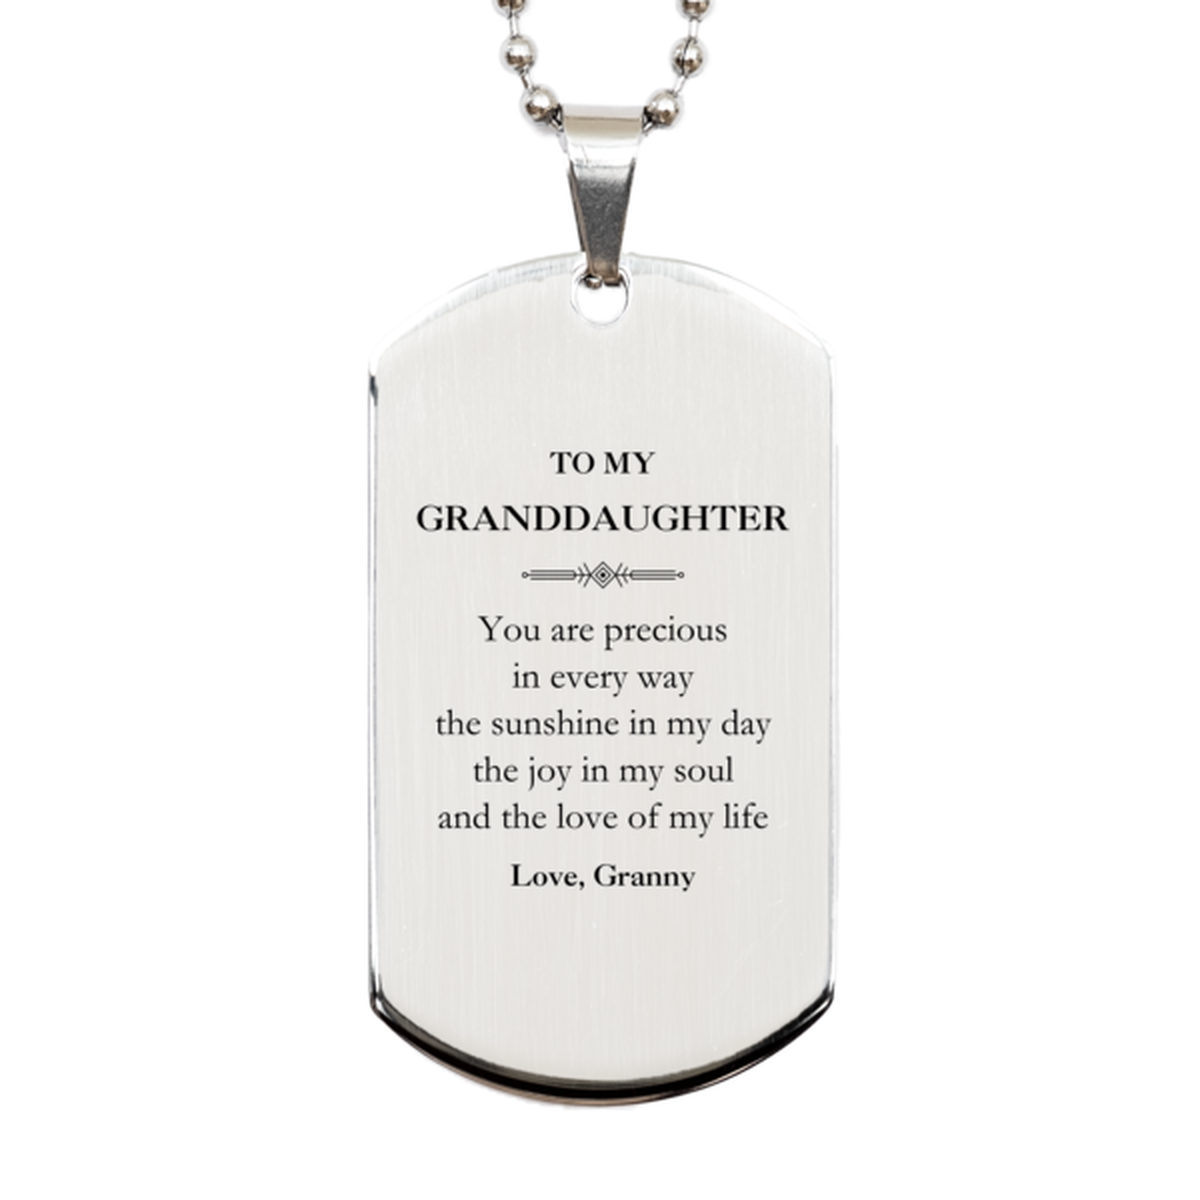 Graduation Gifts for Granddaughter Silver Dog Tag Present from Granny, Christmas Granddaughter Birthday Gifts Granddaughter You are precious in every way the sunshine in my day. Love, Granny